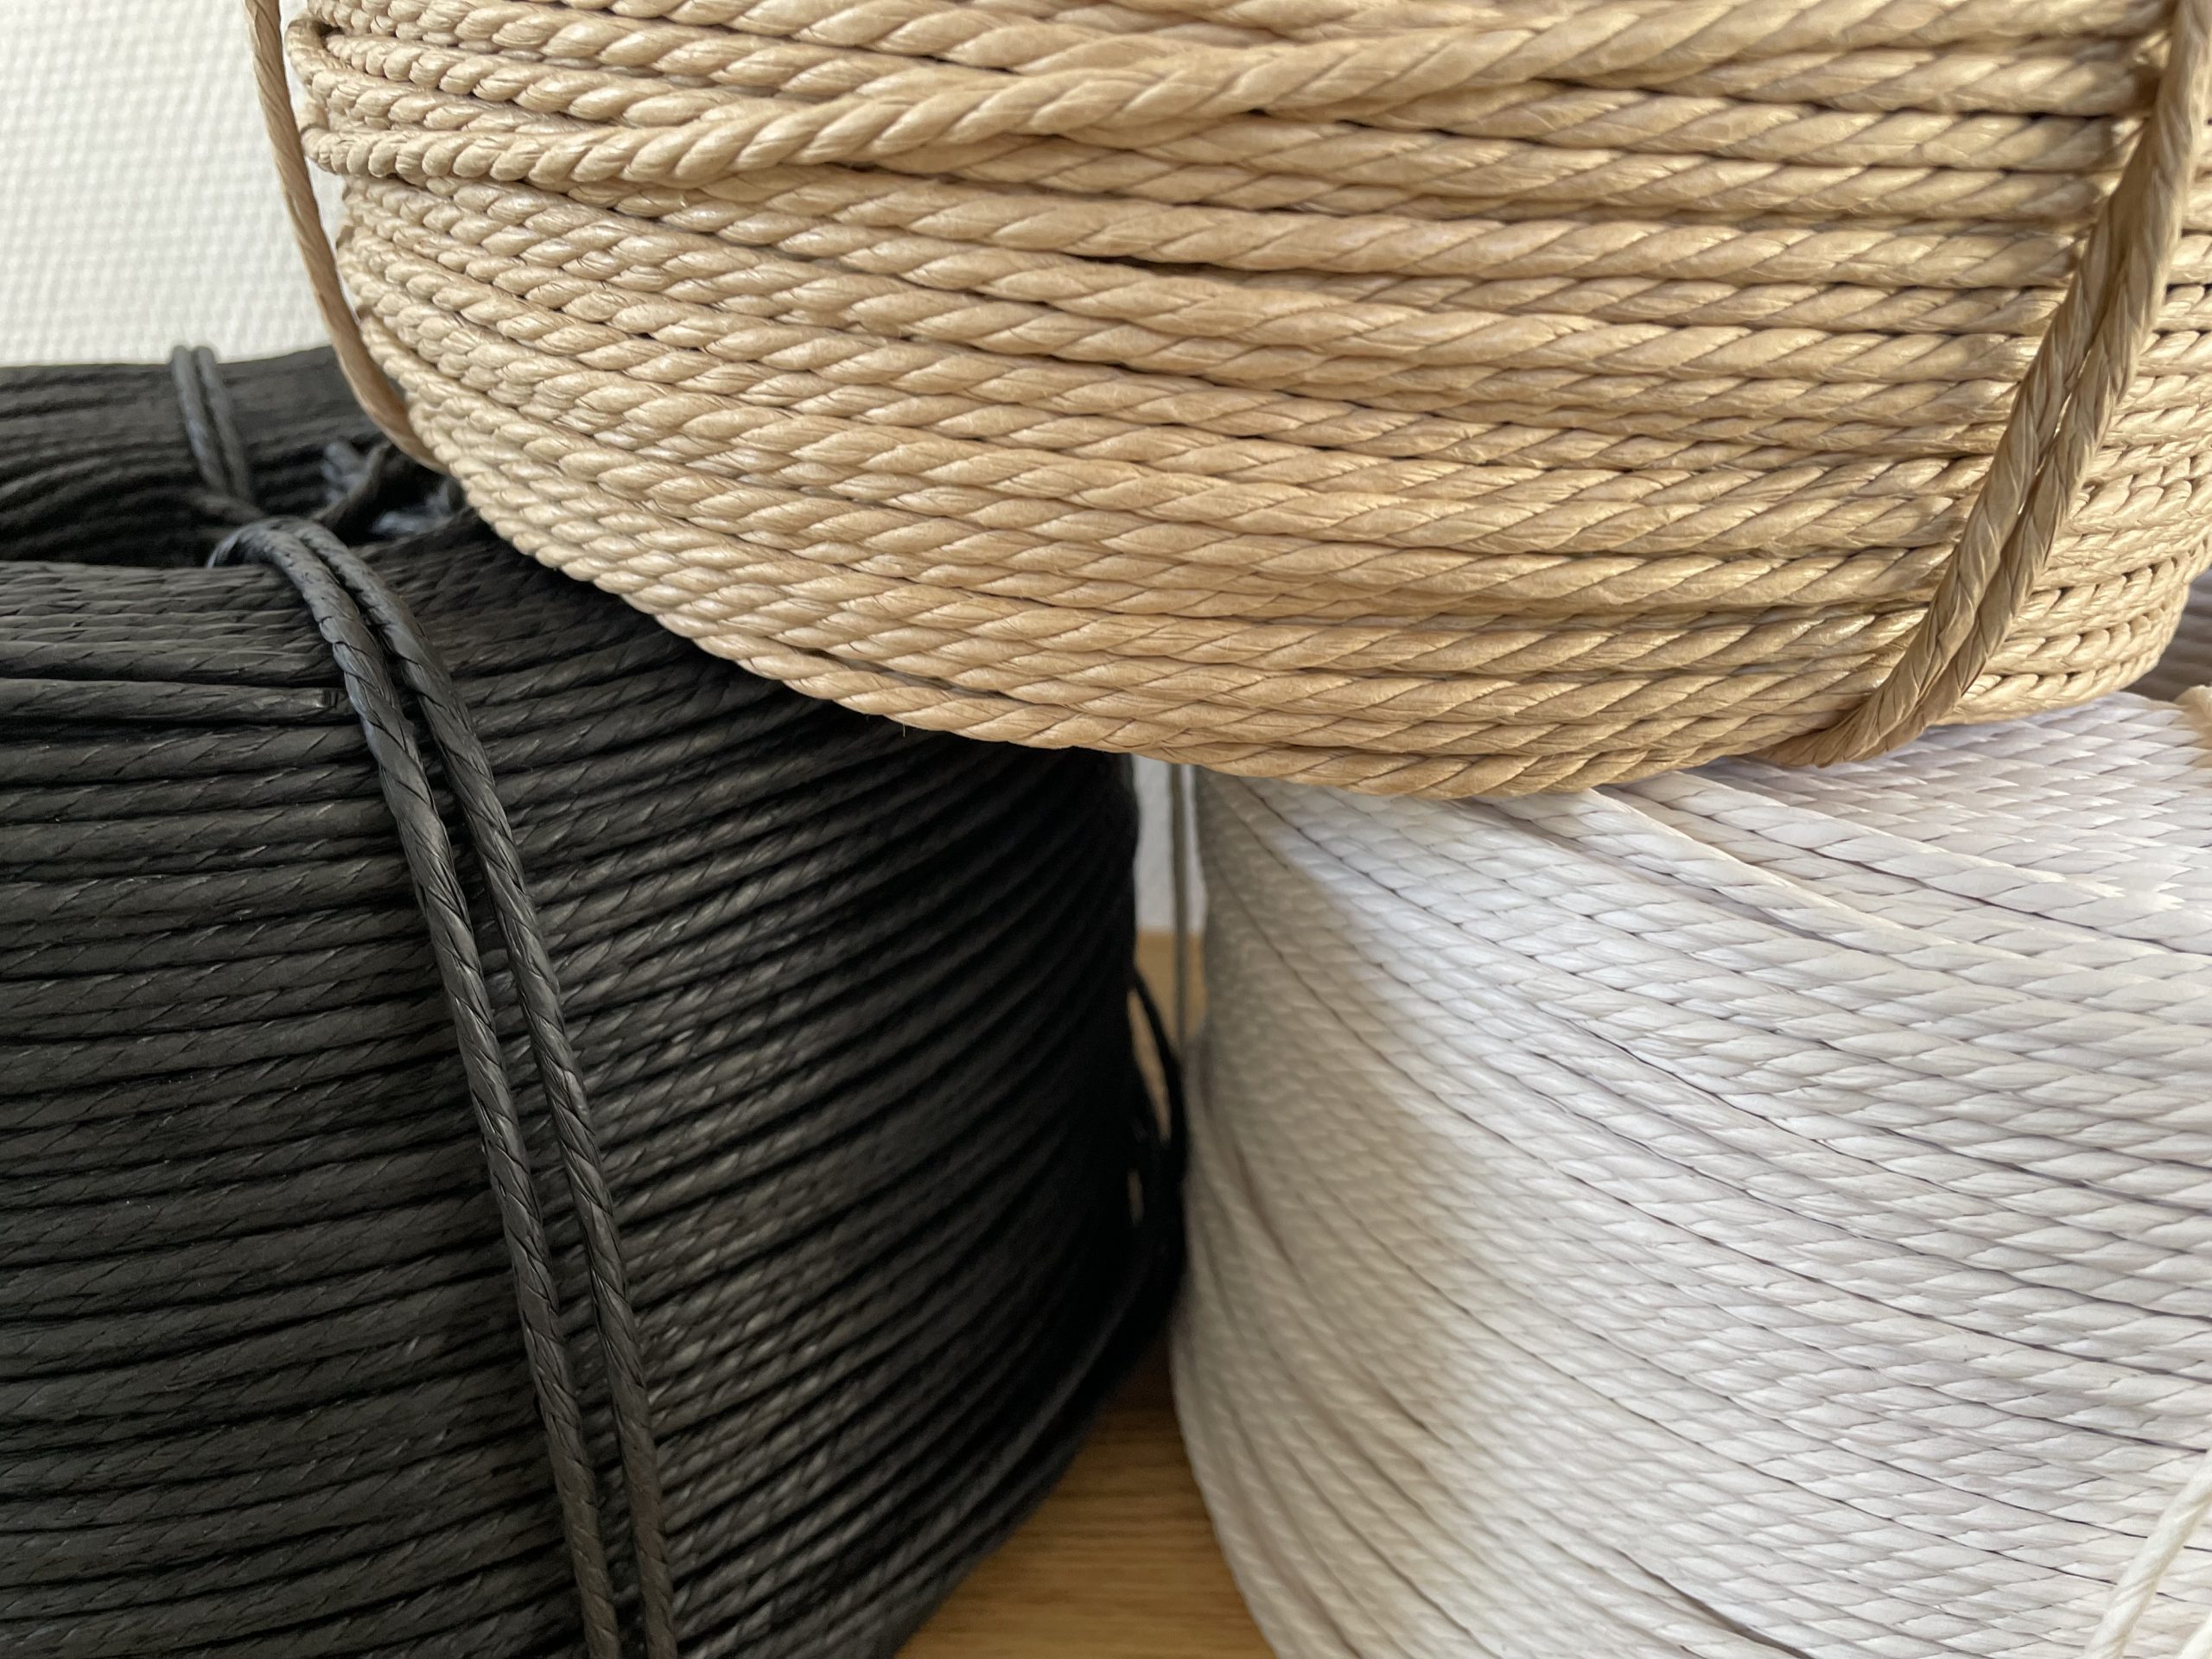 Small Coils, Various lengths, Laced Danish Cord 3 Ply, Denmark Weave (Dye  Lots May Vary)